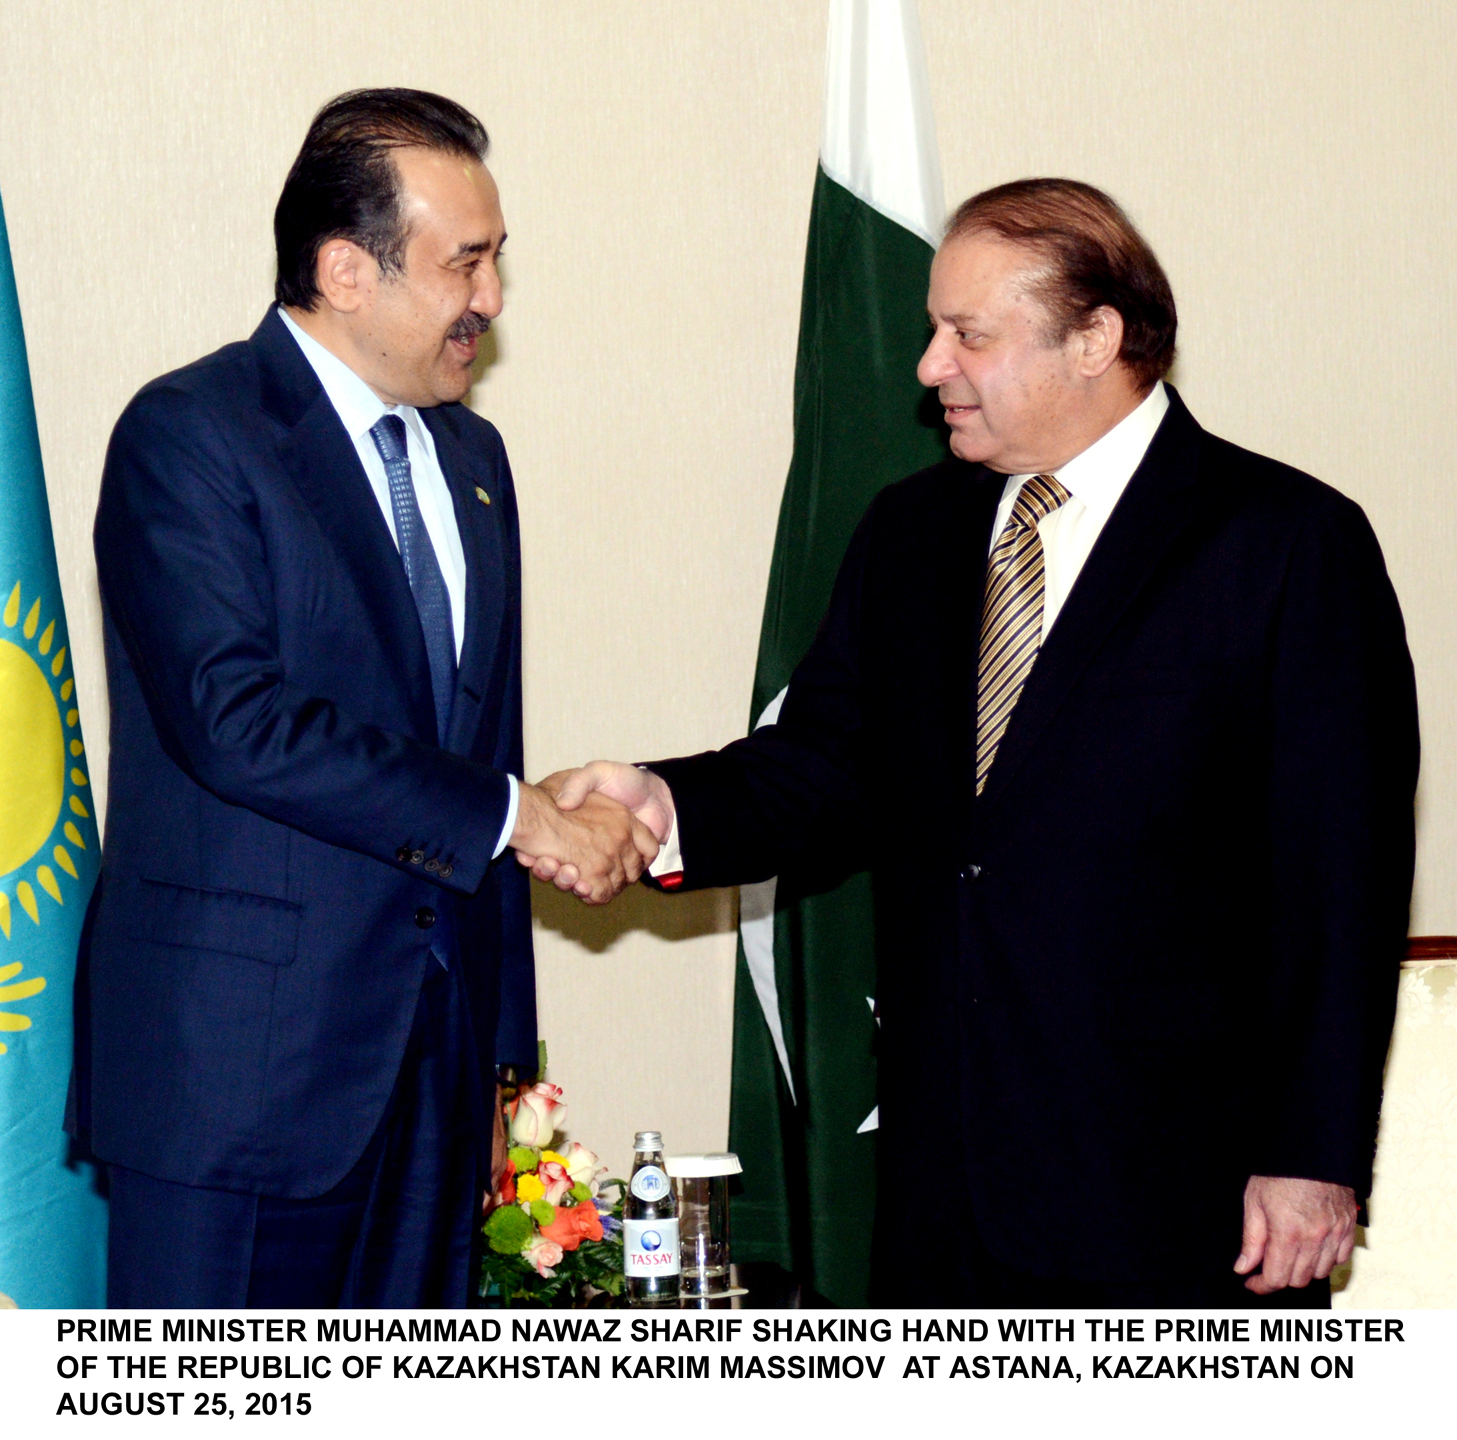 PM Nawaz discusses regional situation with Kazakh counterpart